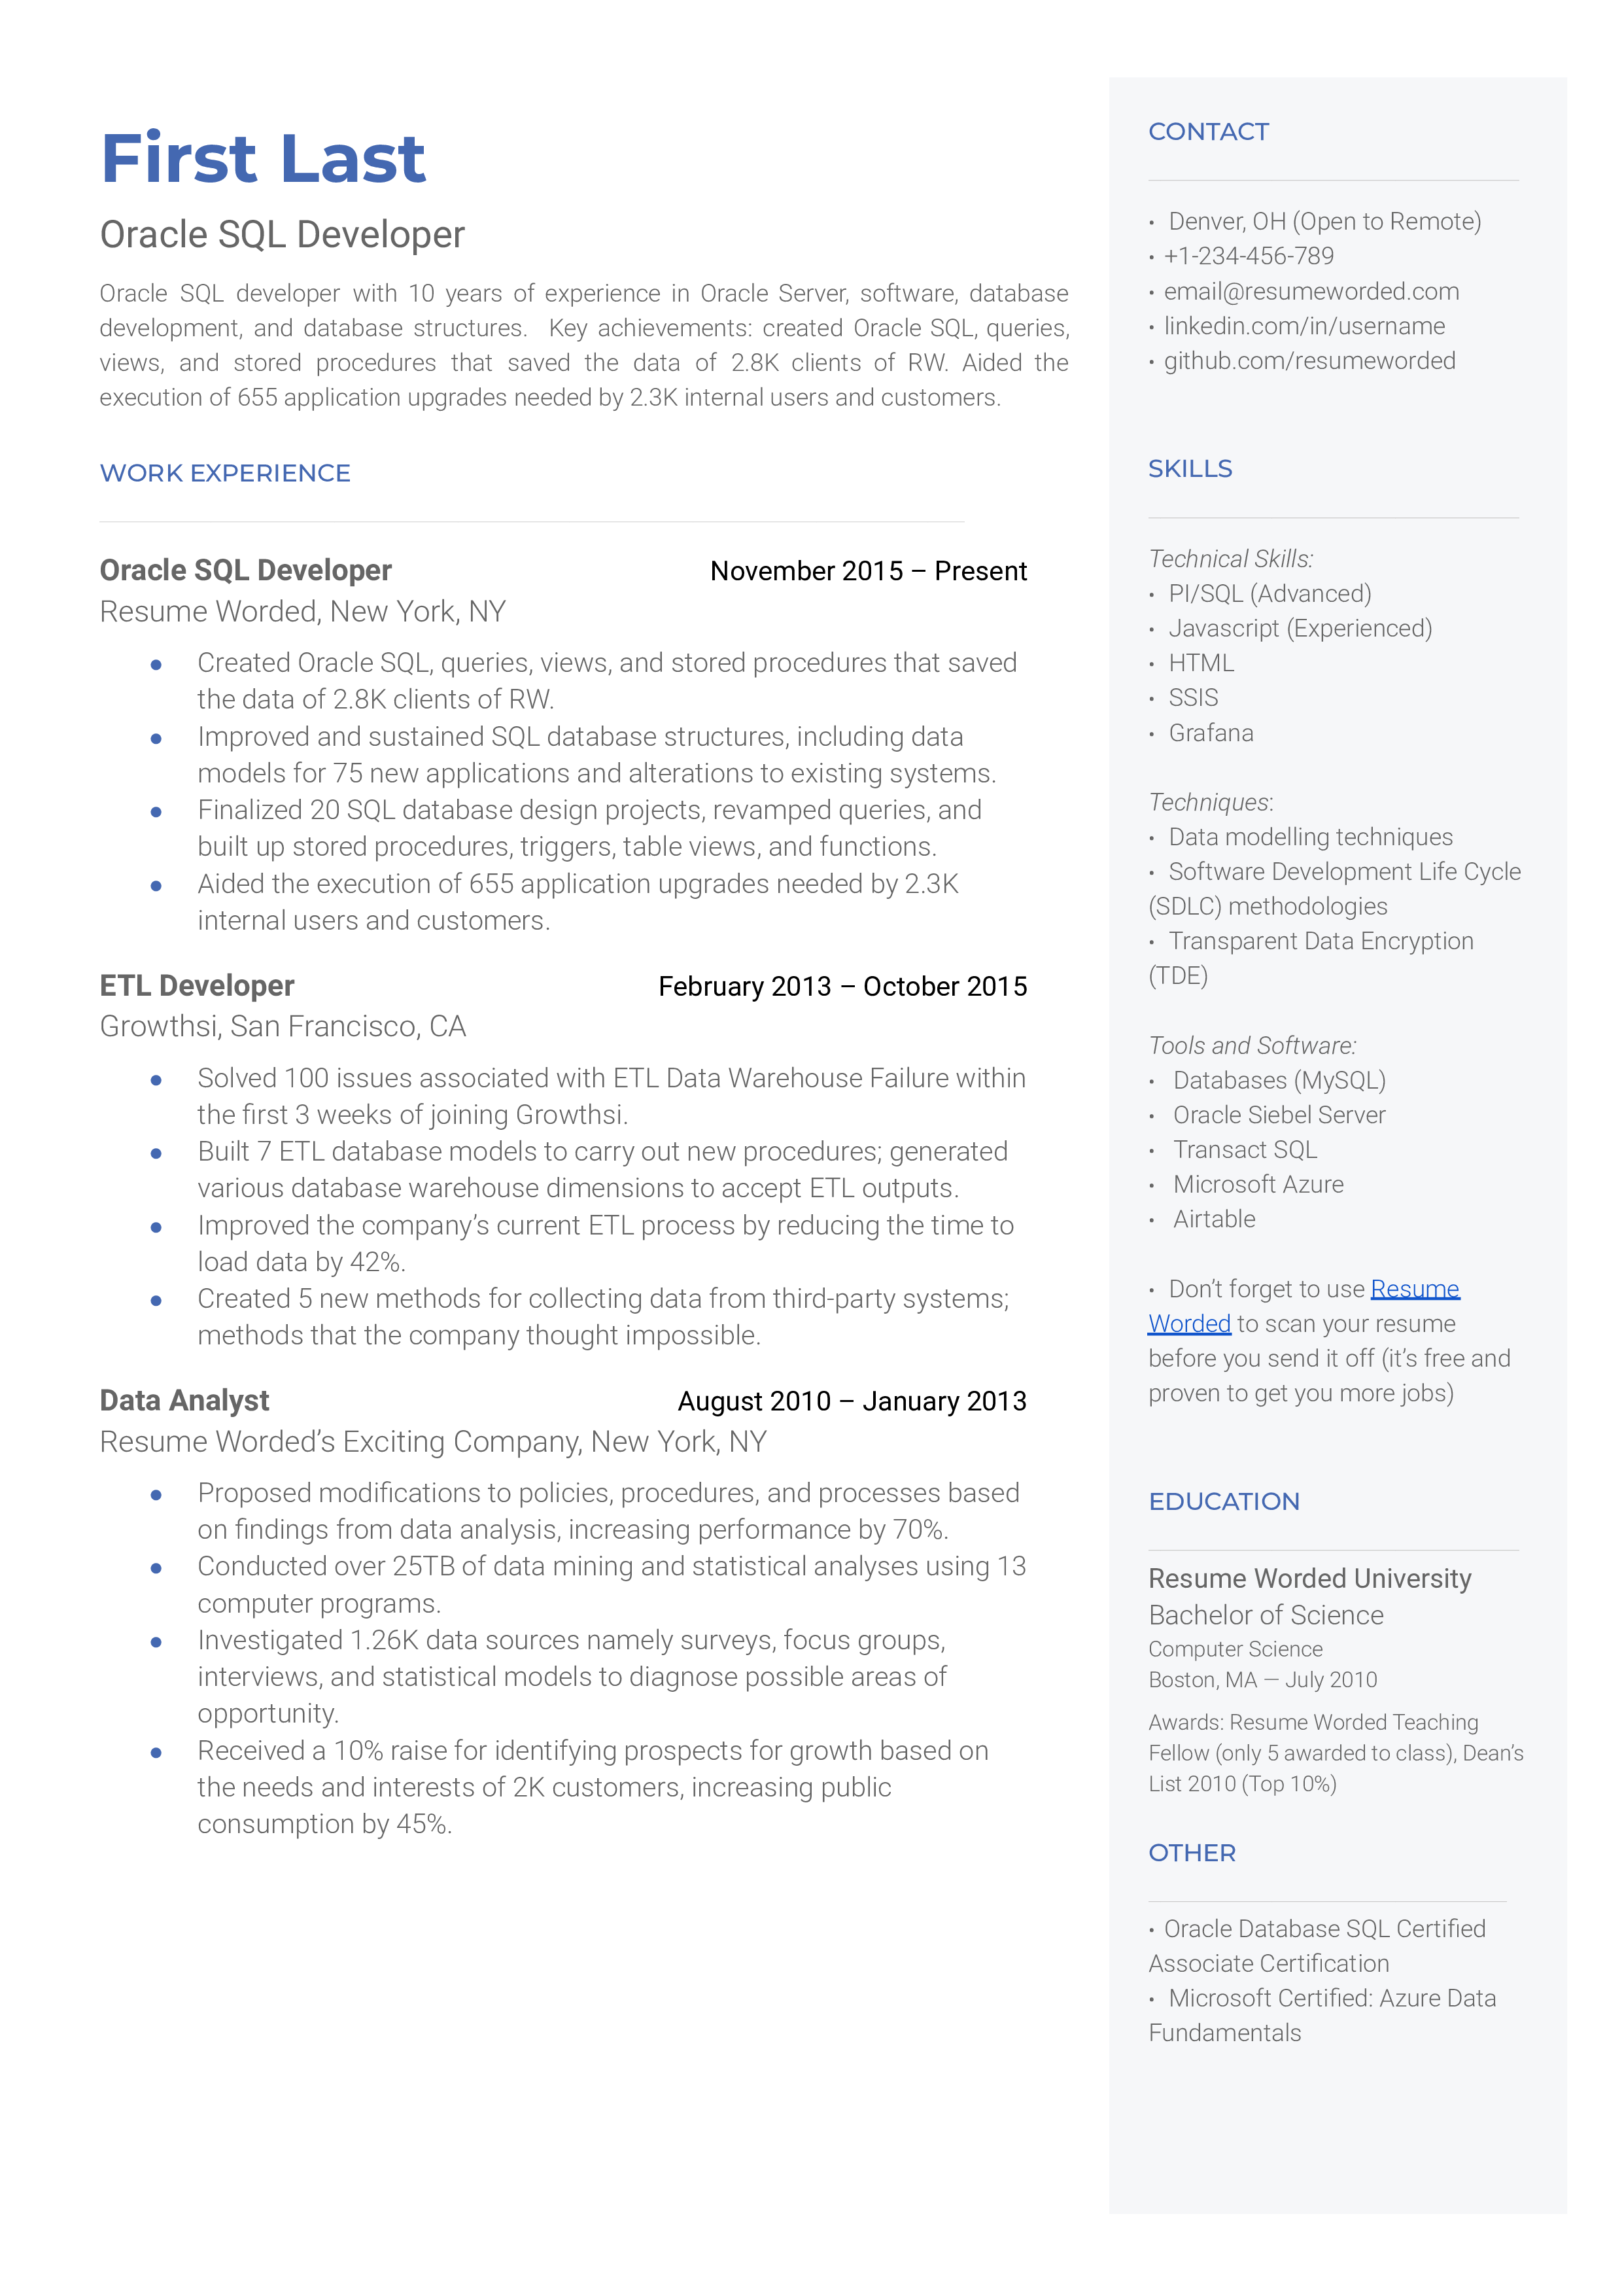 An Oracle SQL developer resume with a degree in computer science, Oralce database SQL certification, and past experience as a data analyst.